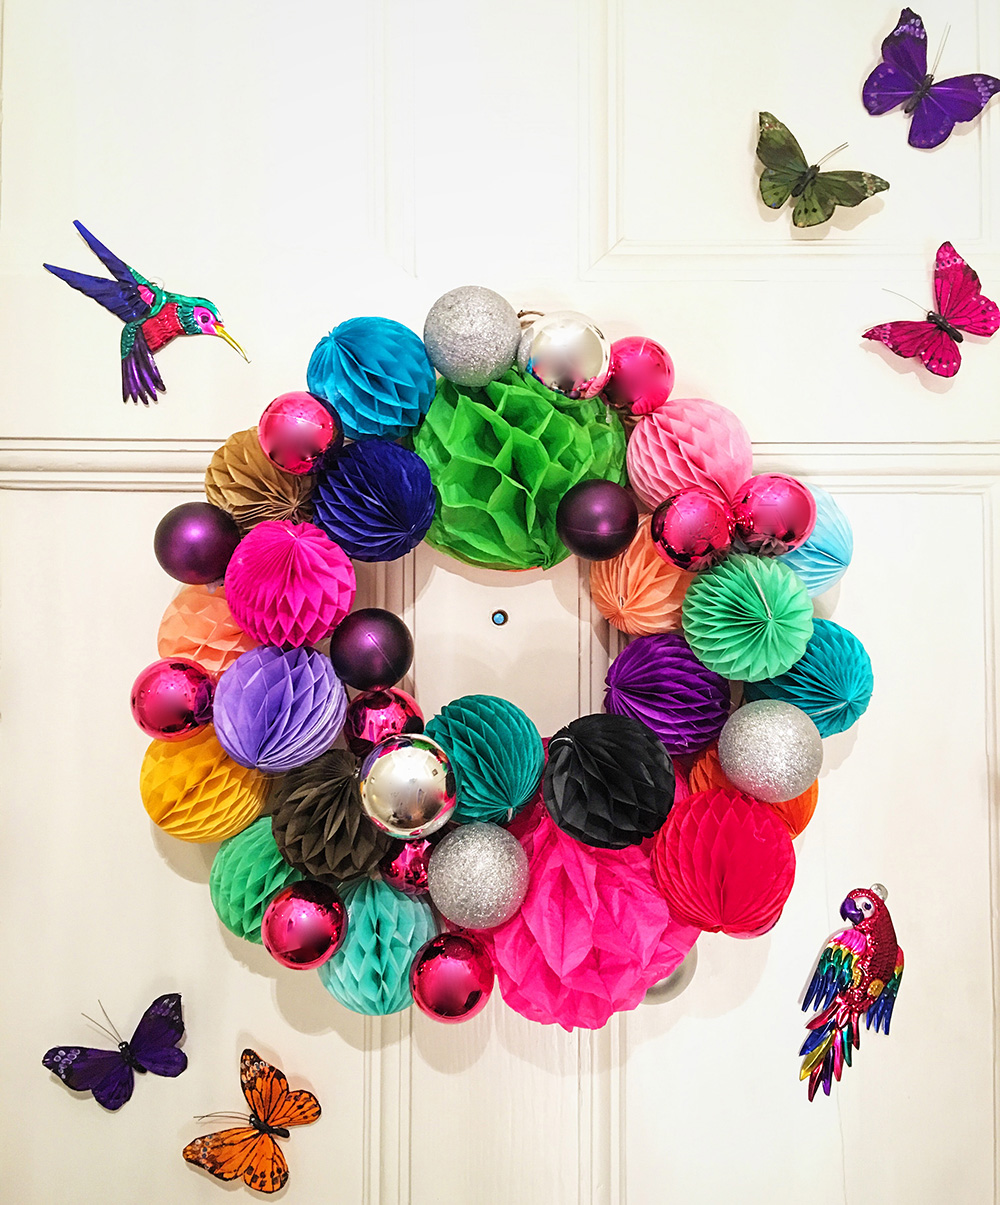 If you want a colourful Christmas, then this honeycomb pom-pom wreath might just be for you!